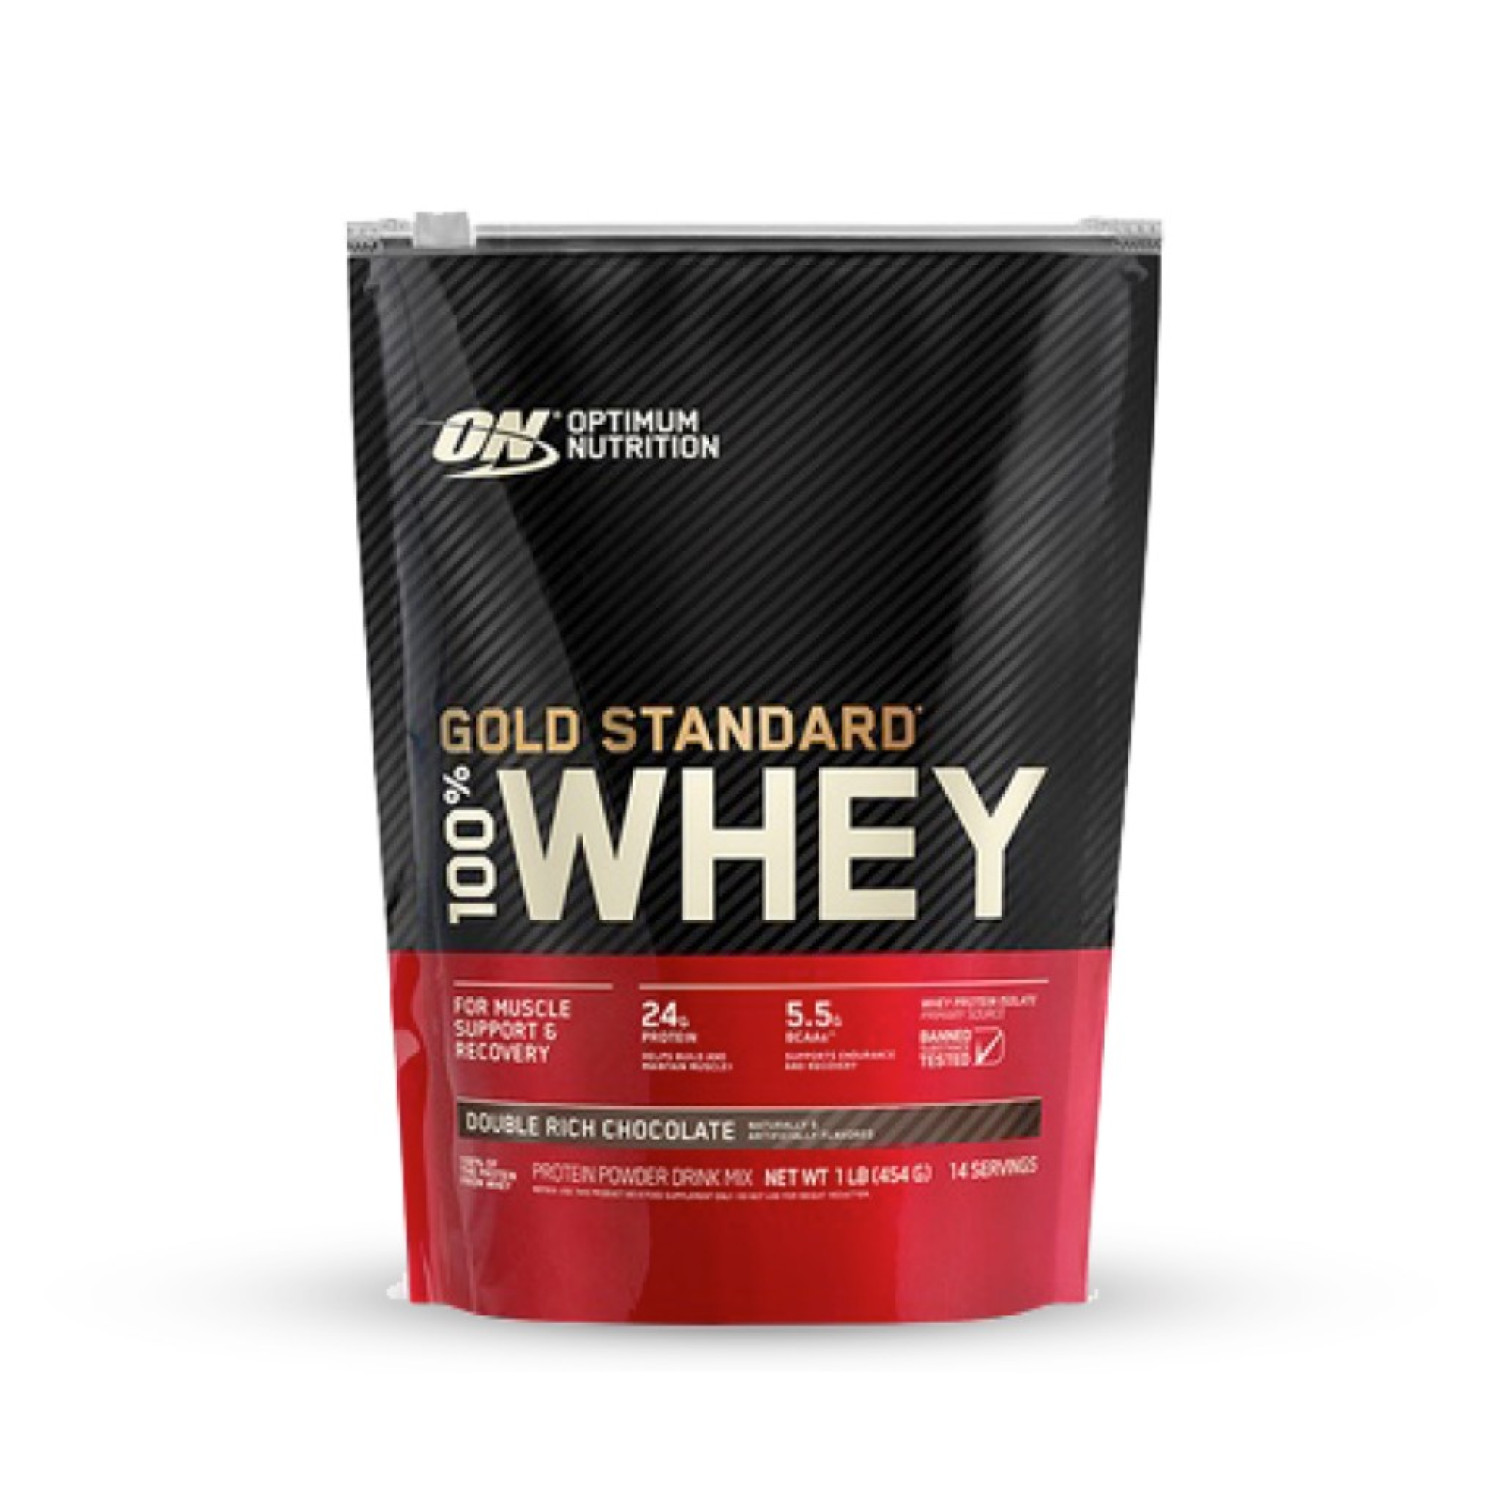 on-100-whey-gold-standard-1lb-double-rich-chocolate-653624565c1e2.jpeg